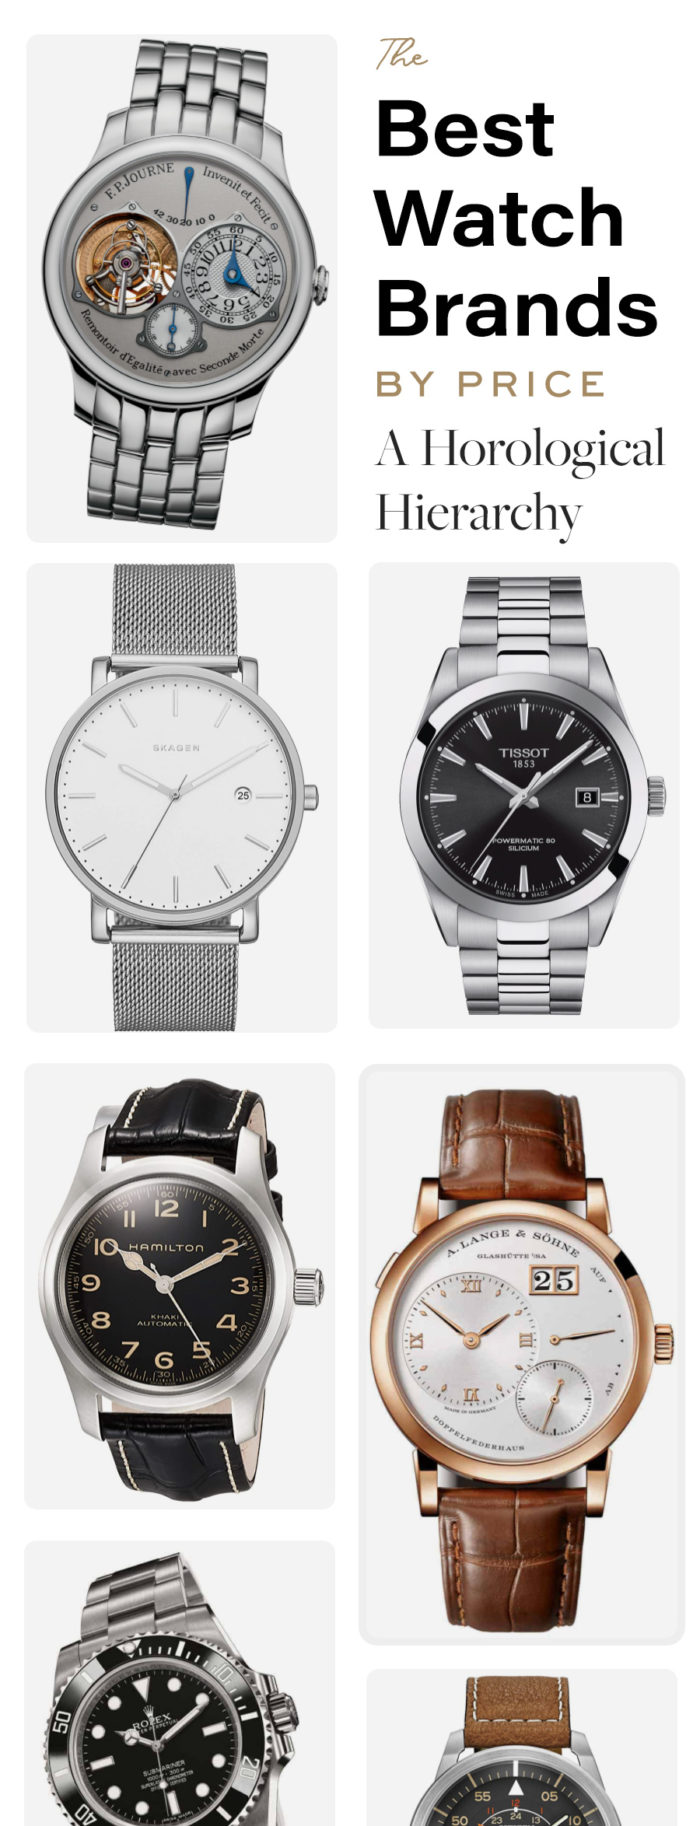 The Best Watch Brands by Price A Horological Hierarchy Primer